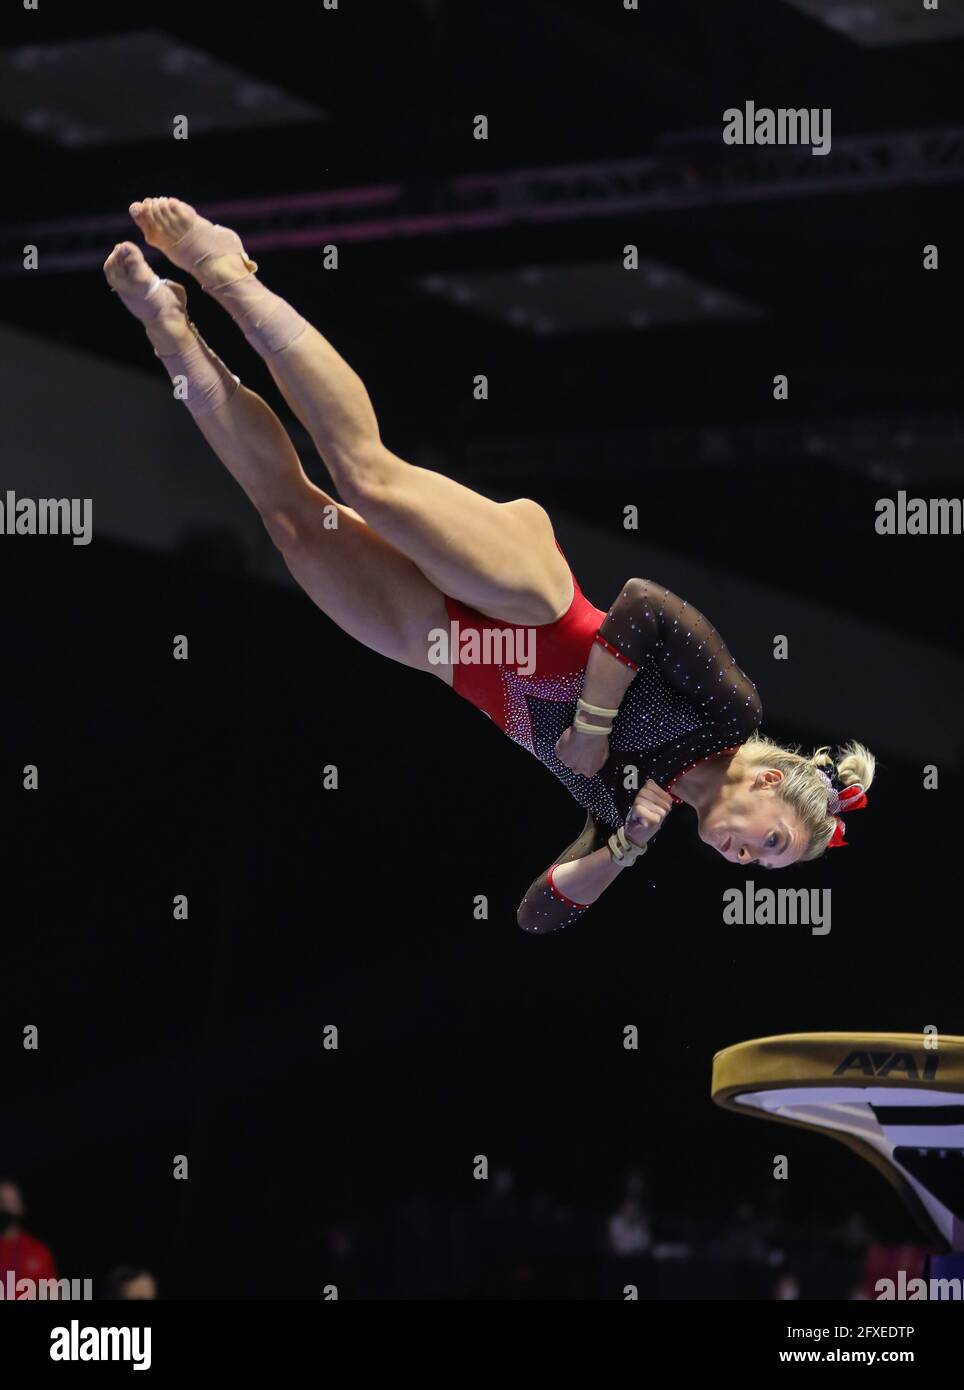 May 22, 2021: MyKayla Skinner twists in the air during her vault at the 2021 GK U.S. Classic at the Indiana Convention Center in Indianapolis, IN. Kyle Okita/CSM Stock Photo